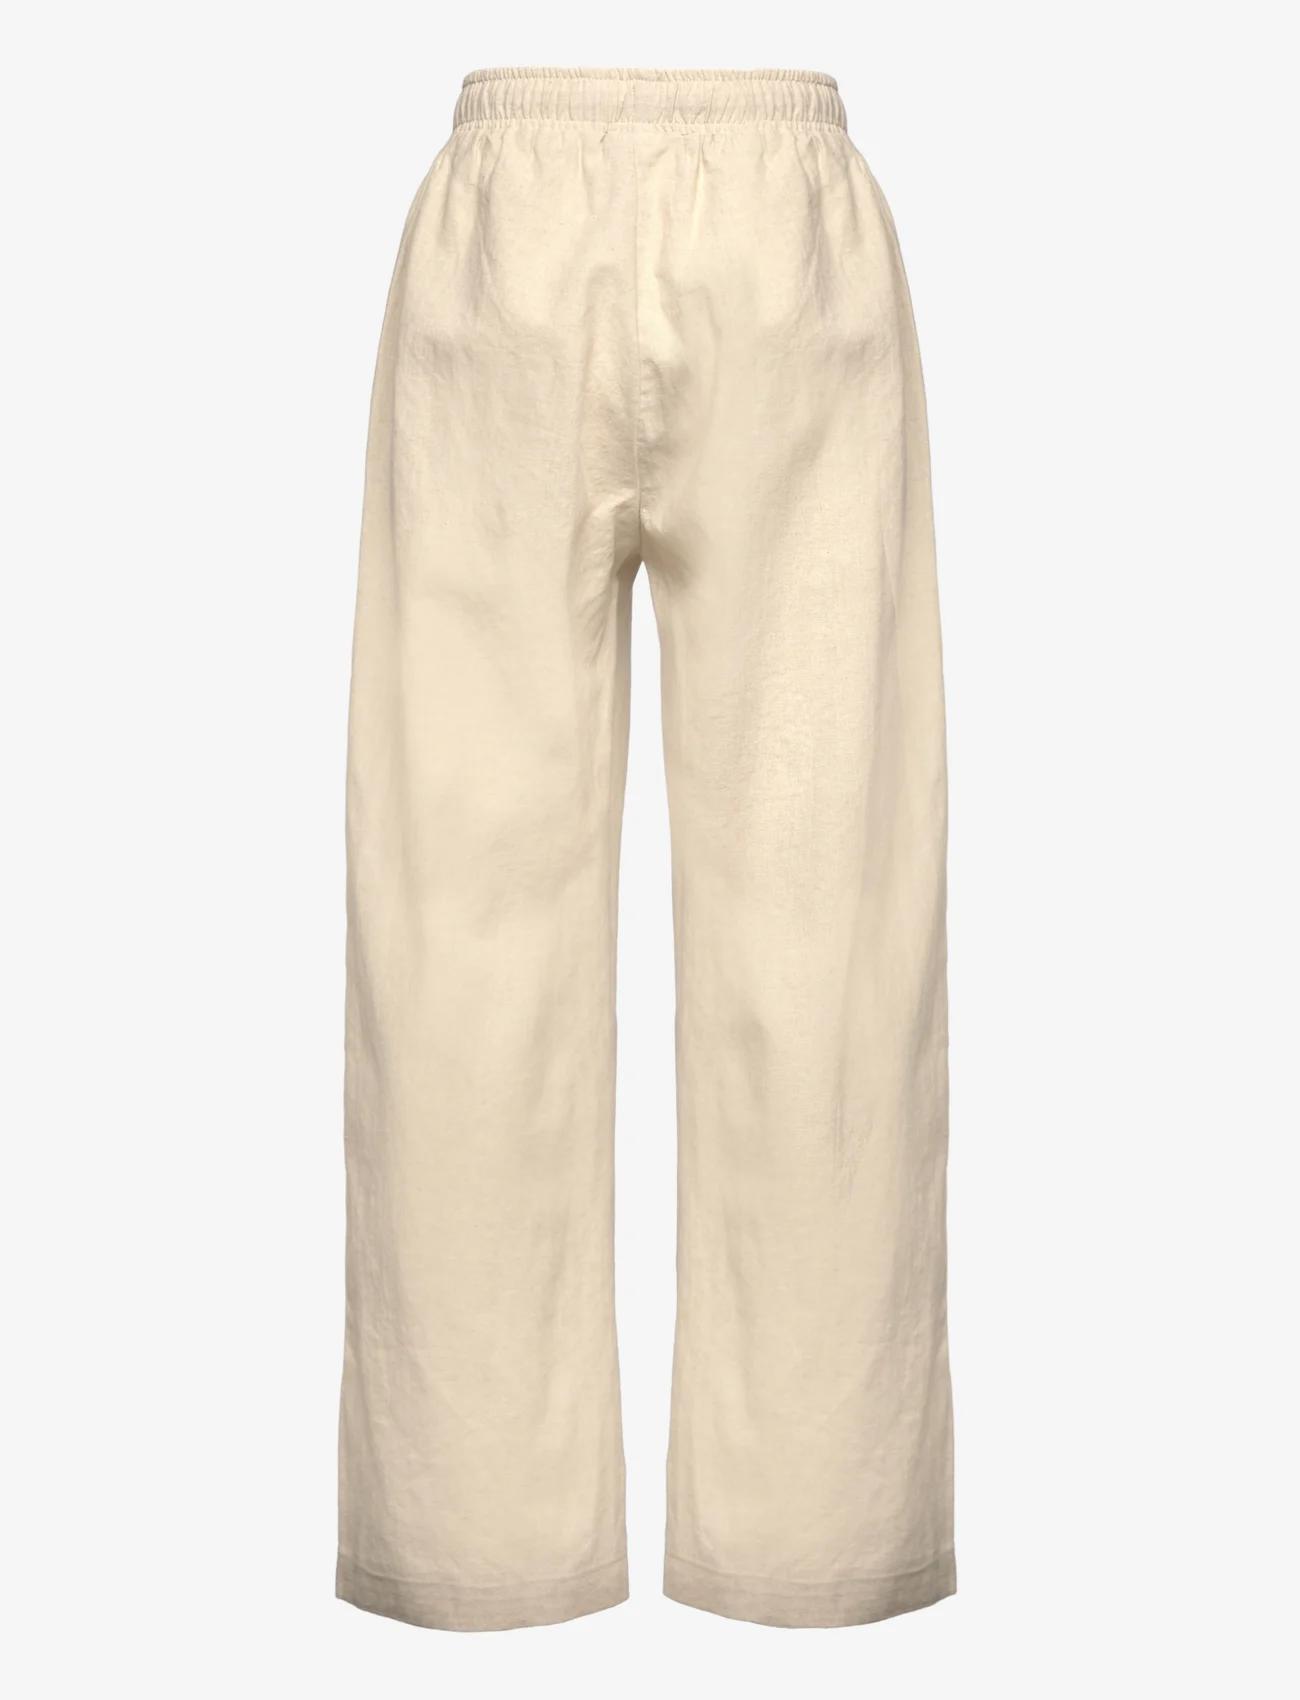 Sofie Schnoor Young - Trousers - linnen - light sand - 1